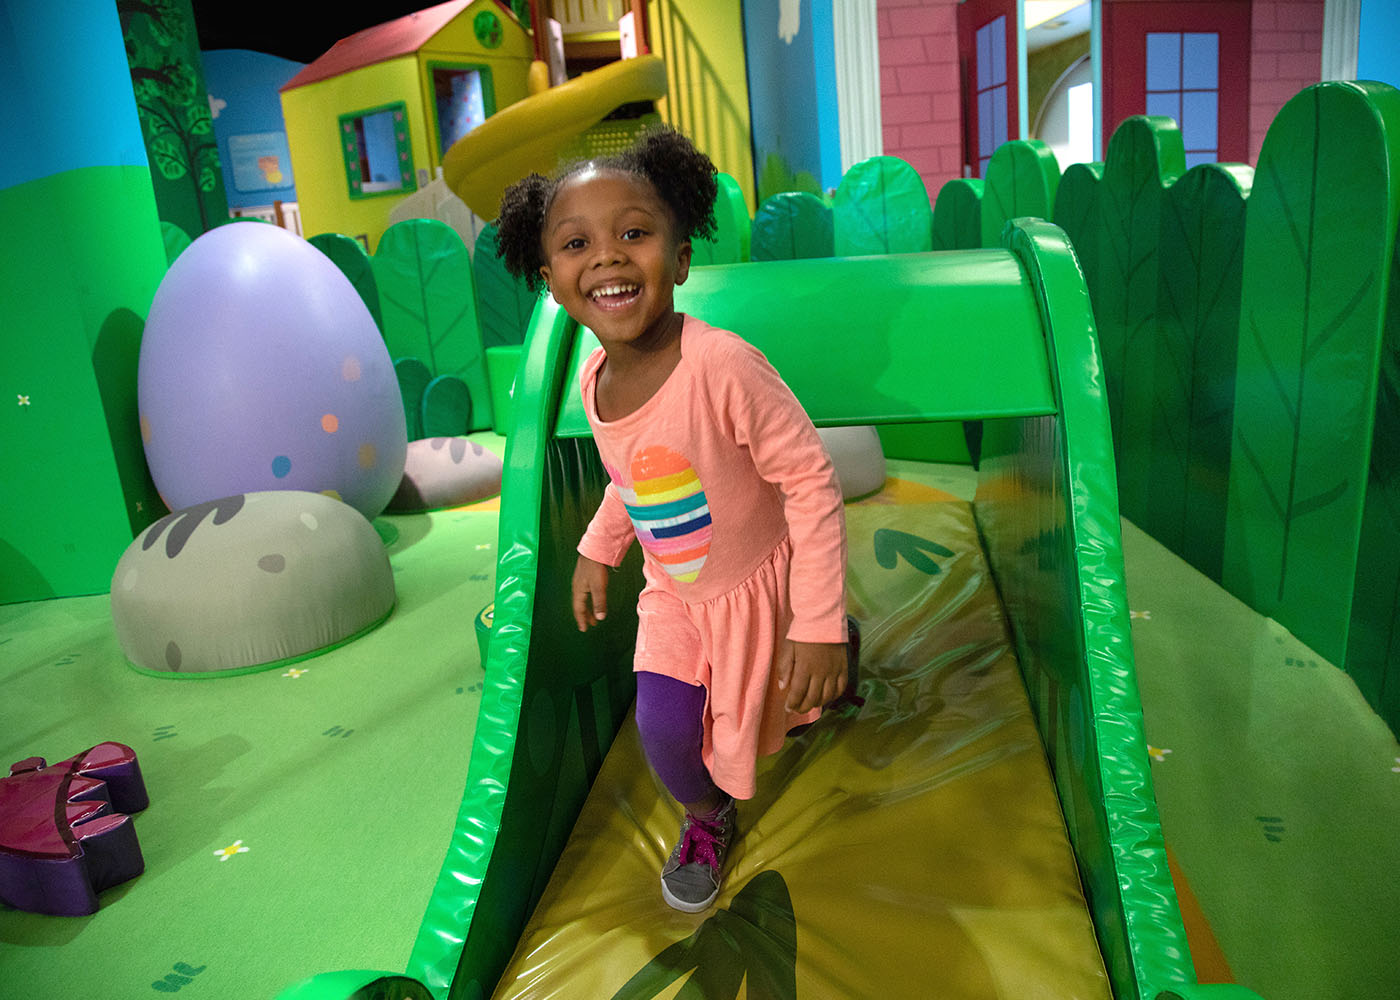 Peppa Pig World of Play Michigan - at Great Lakes Crossing Outlets mall in Auburn Hills, MI